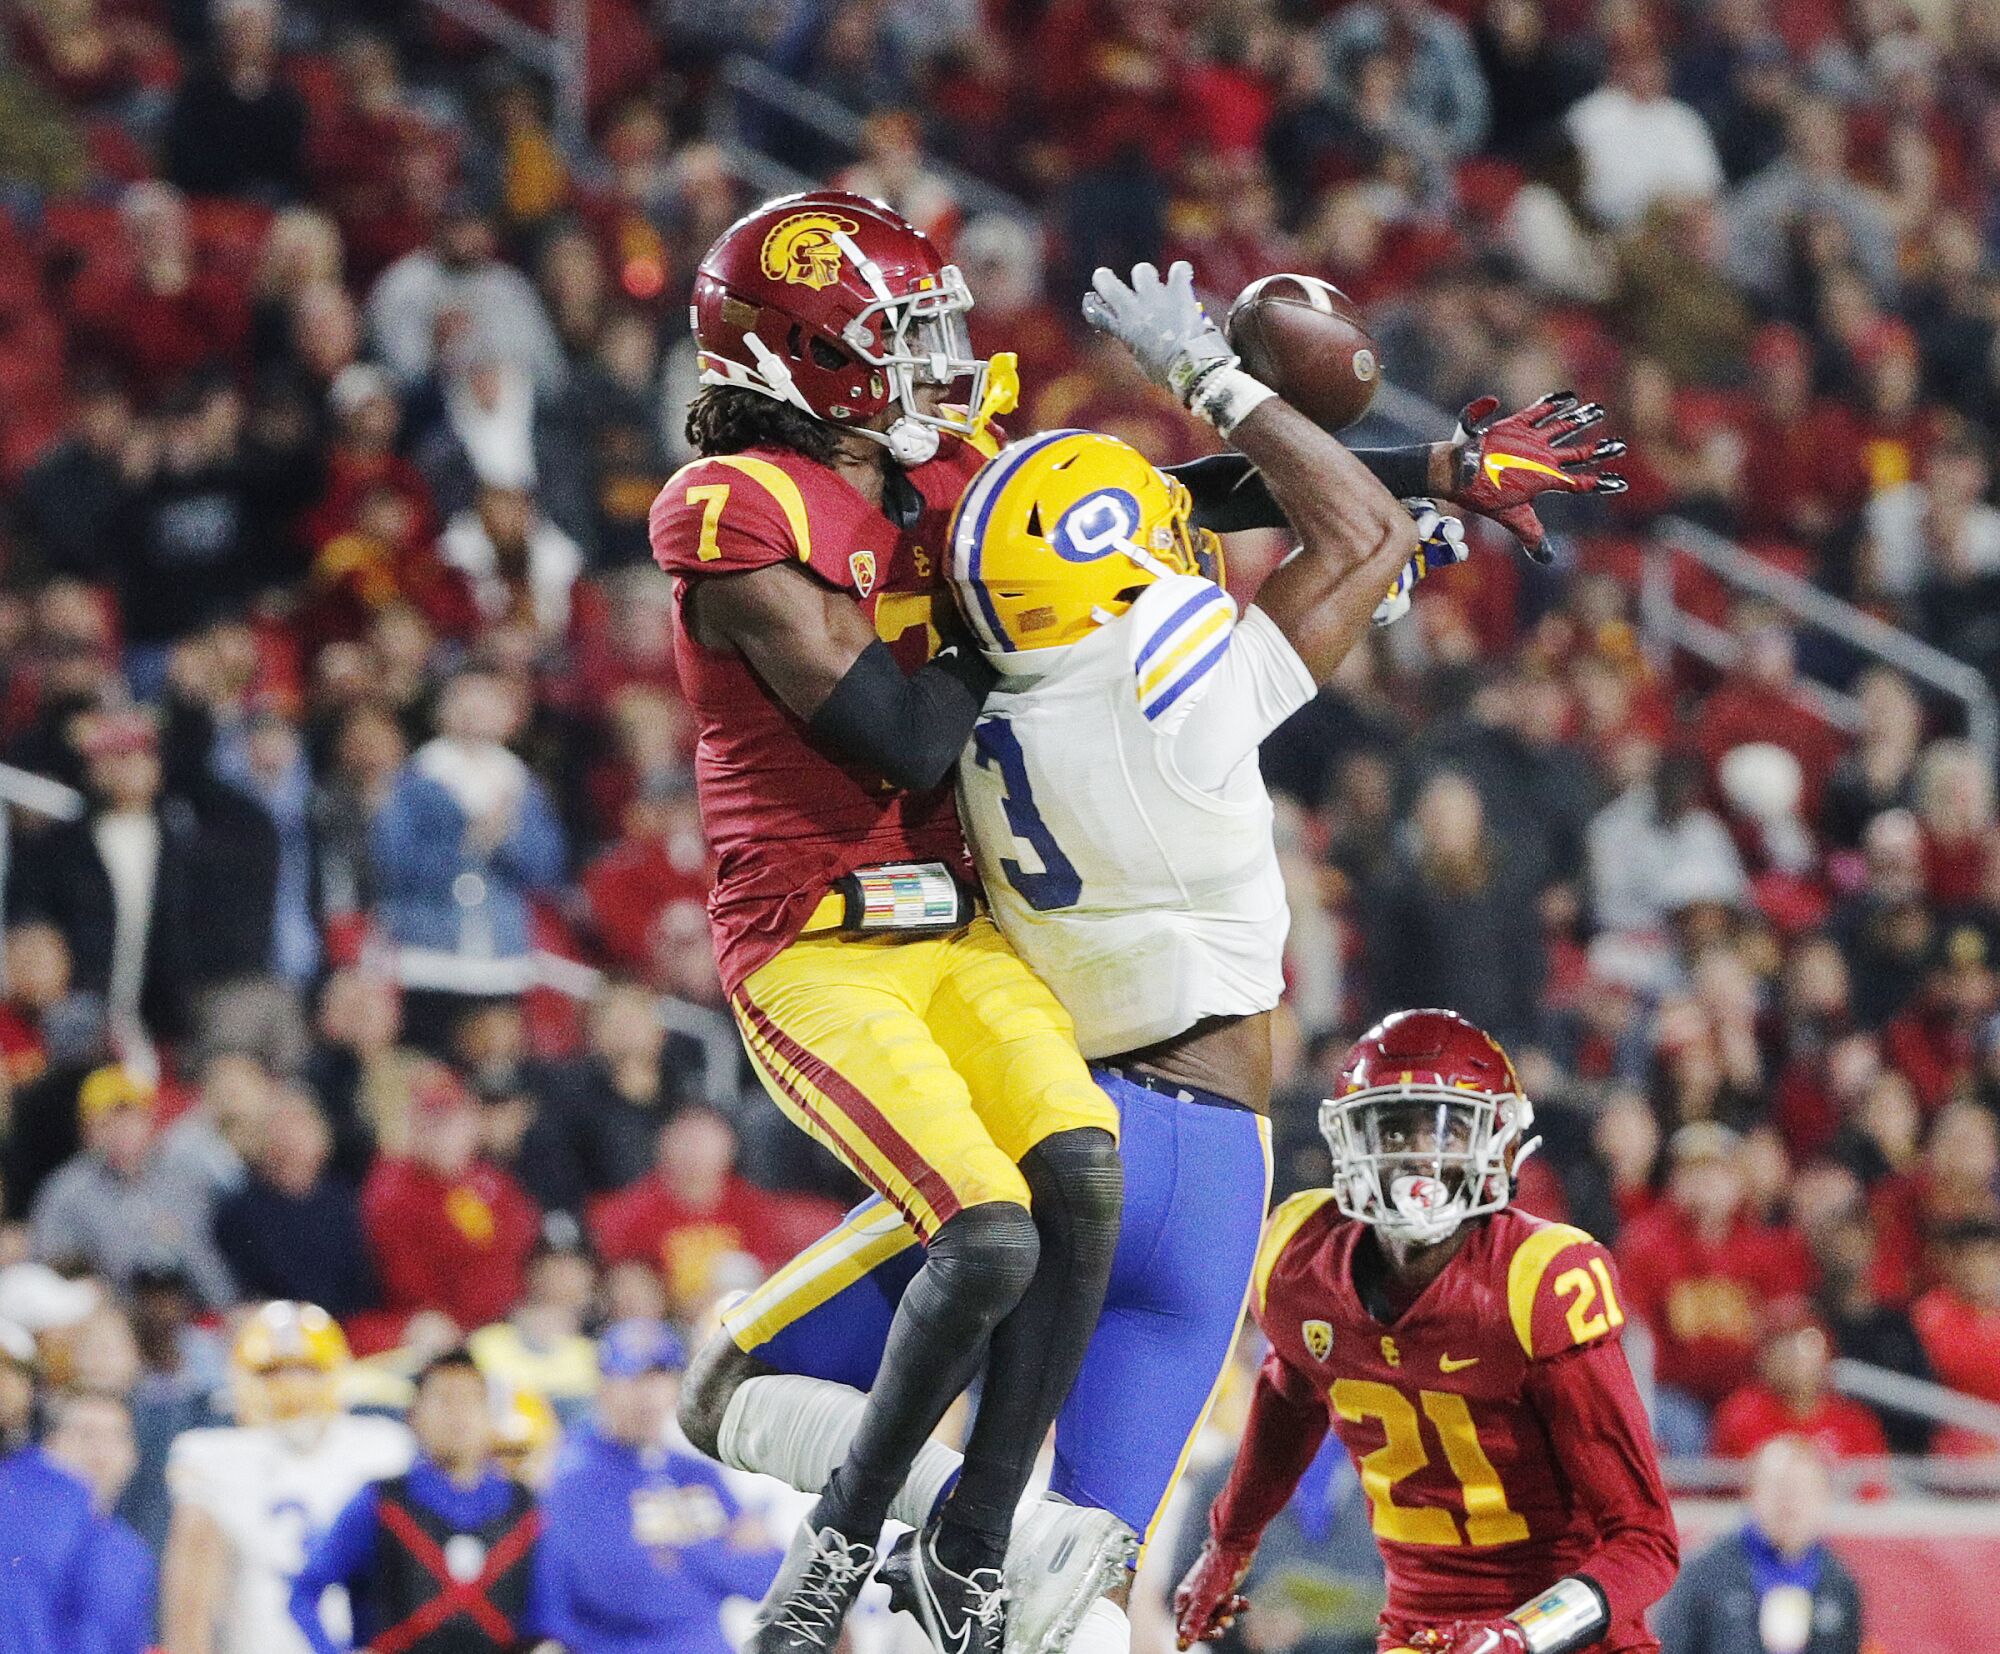 USC defensive back Calen Bullock breaks up a pass intended for California wide receiver Jeremiah Hunter in the second half.